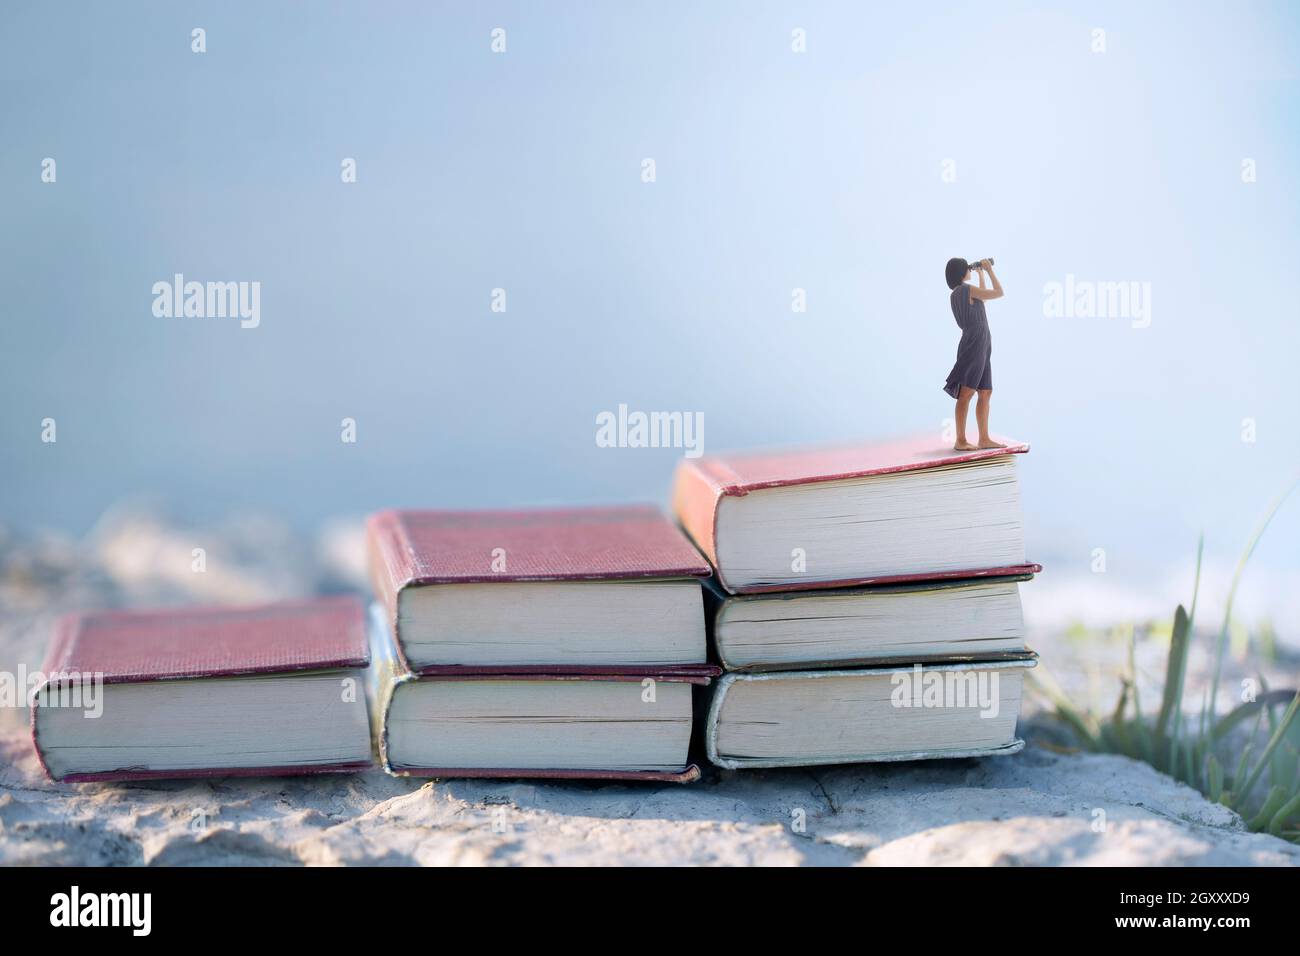 woman with binoculars on the top of a ladder of books, surreal concept Stock Photo